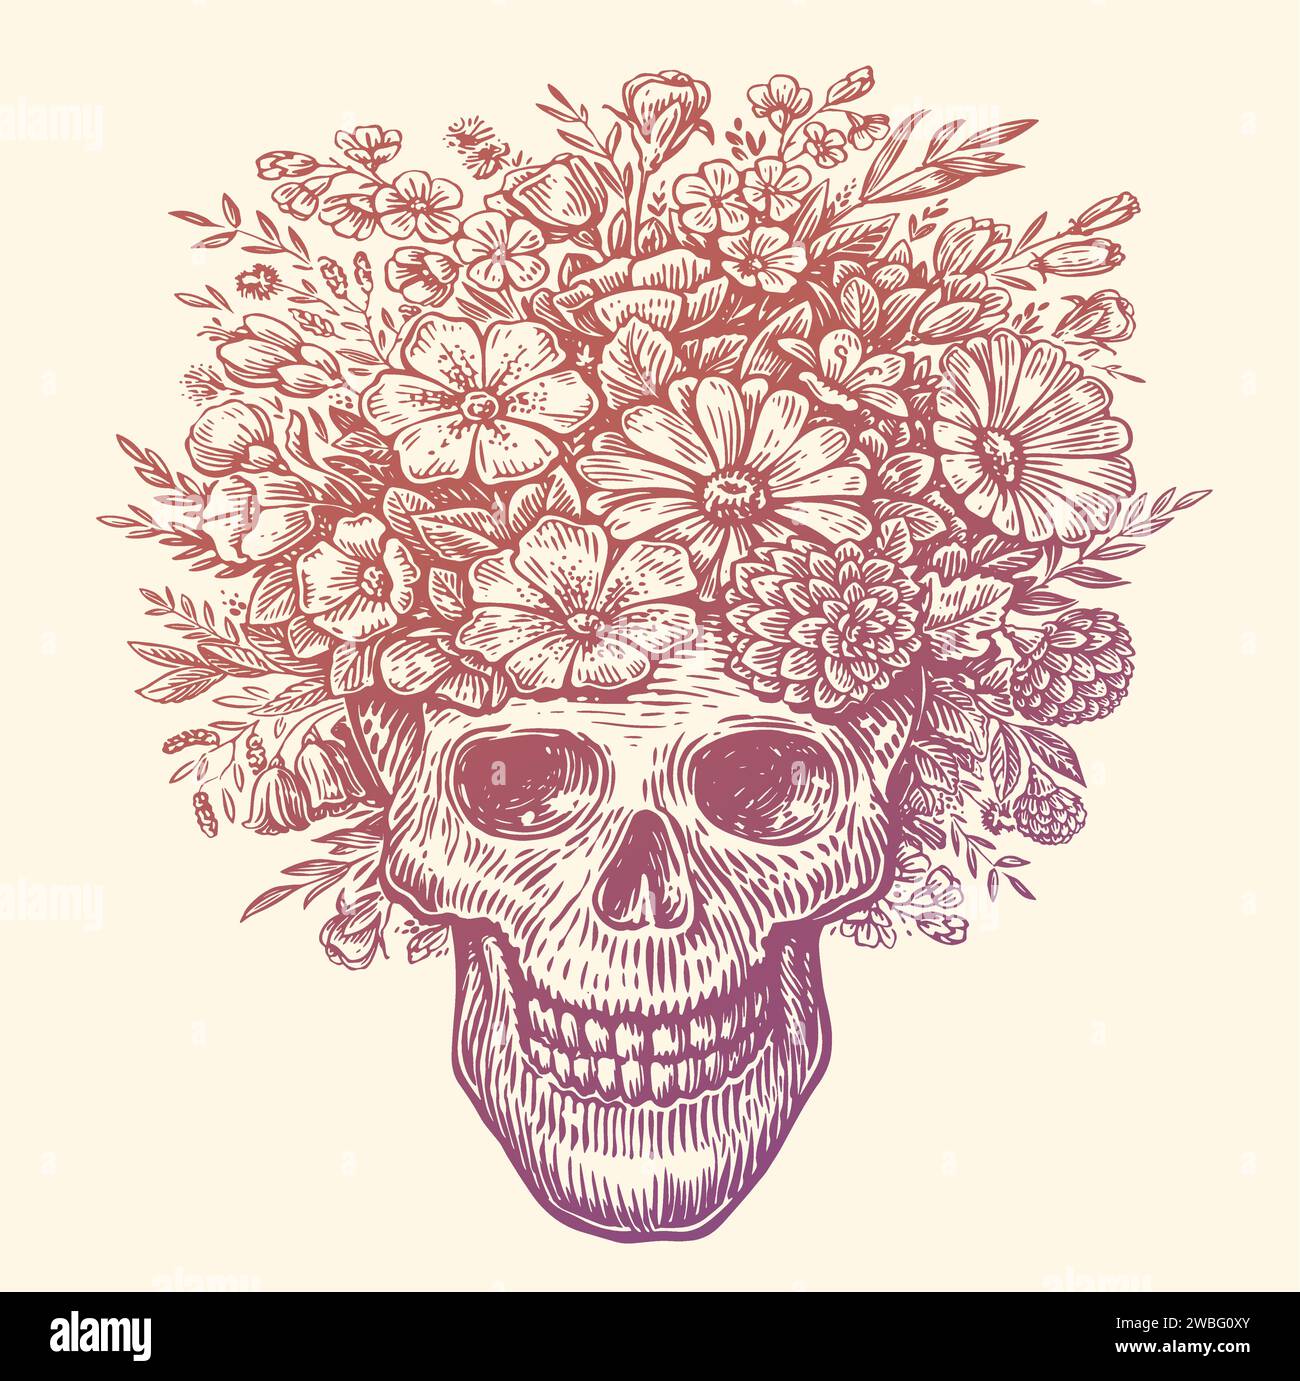 Human Skull With Flowers Wreath On Head Hand Drawn Vector Illustration Stock Vector Image And Art